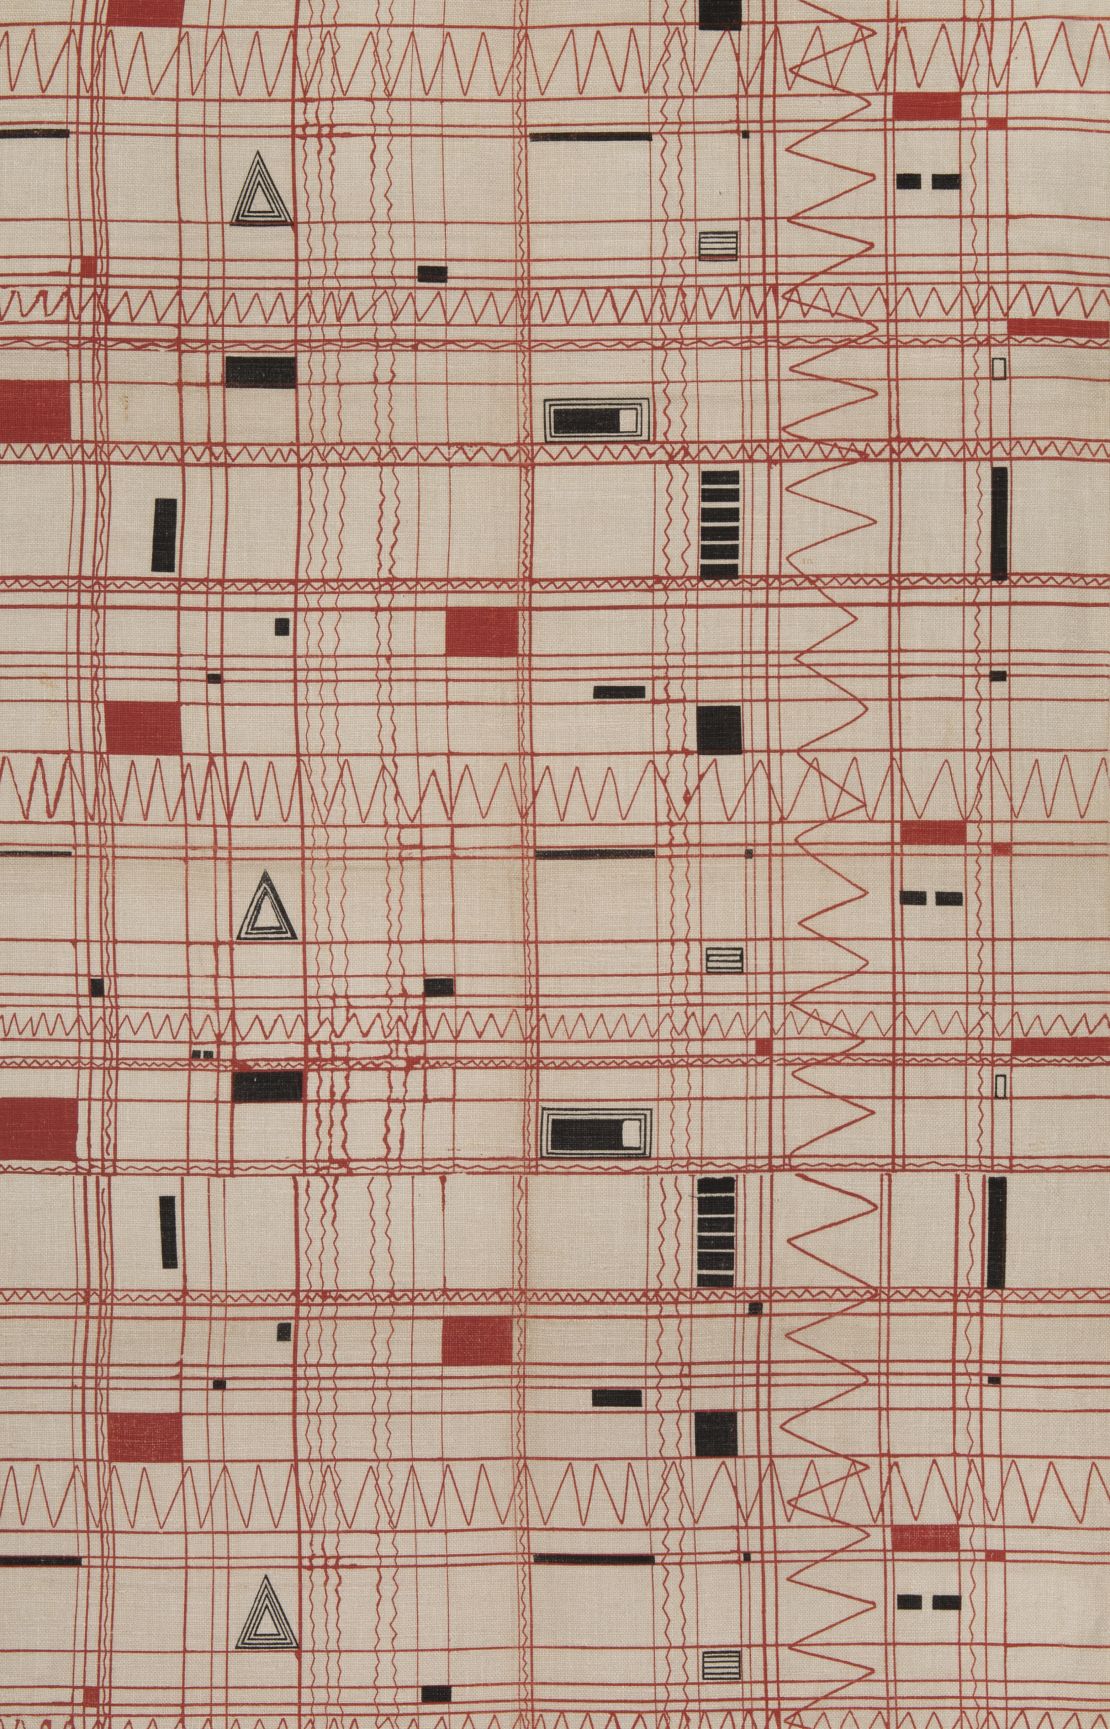 Adler Schnee's textile "Construction," 1950, made with ink on bleached linen.